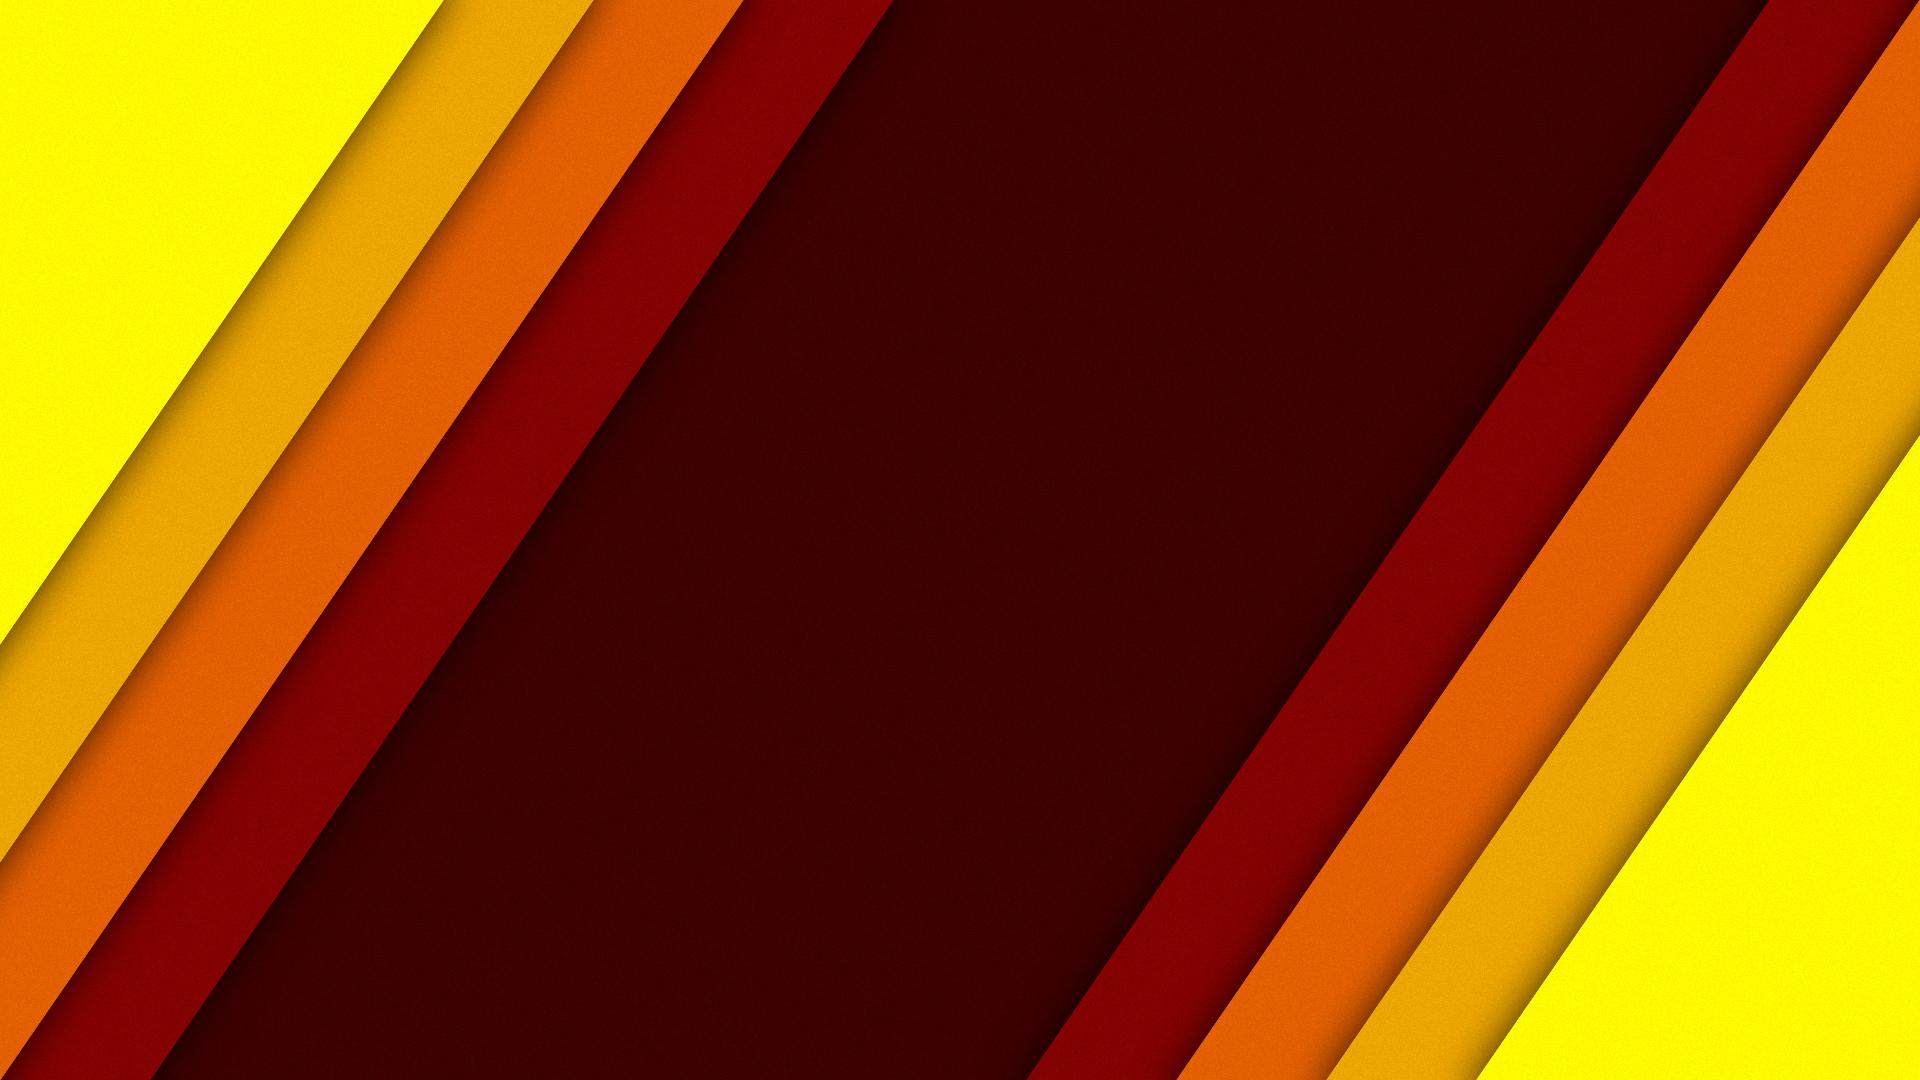 HD wallpaper, Lines, Minimalism, Material Style, Yellow, Orange, Red, Brown, Static